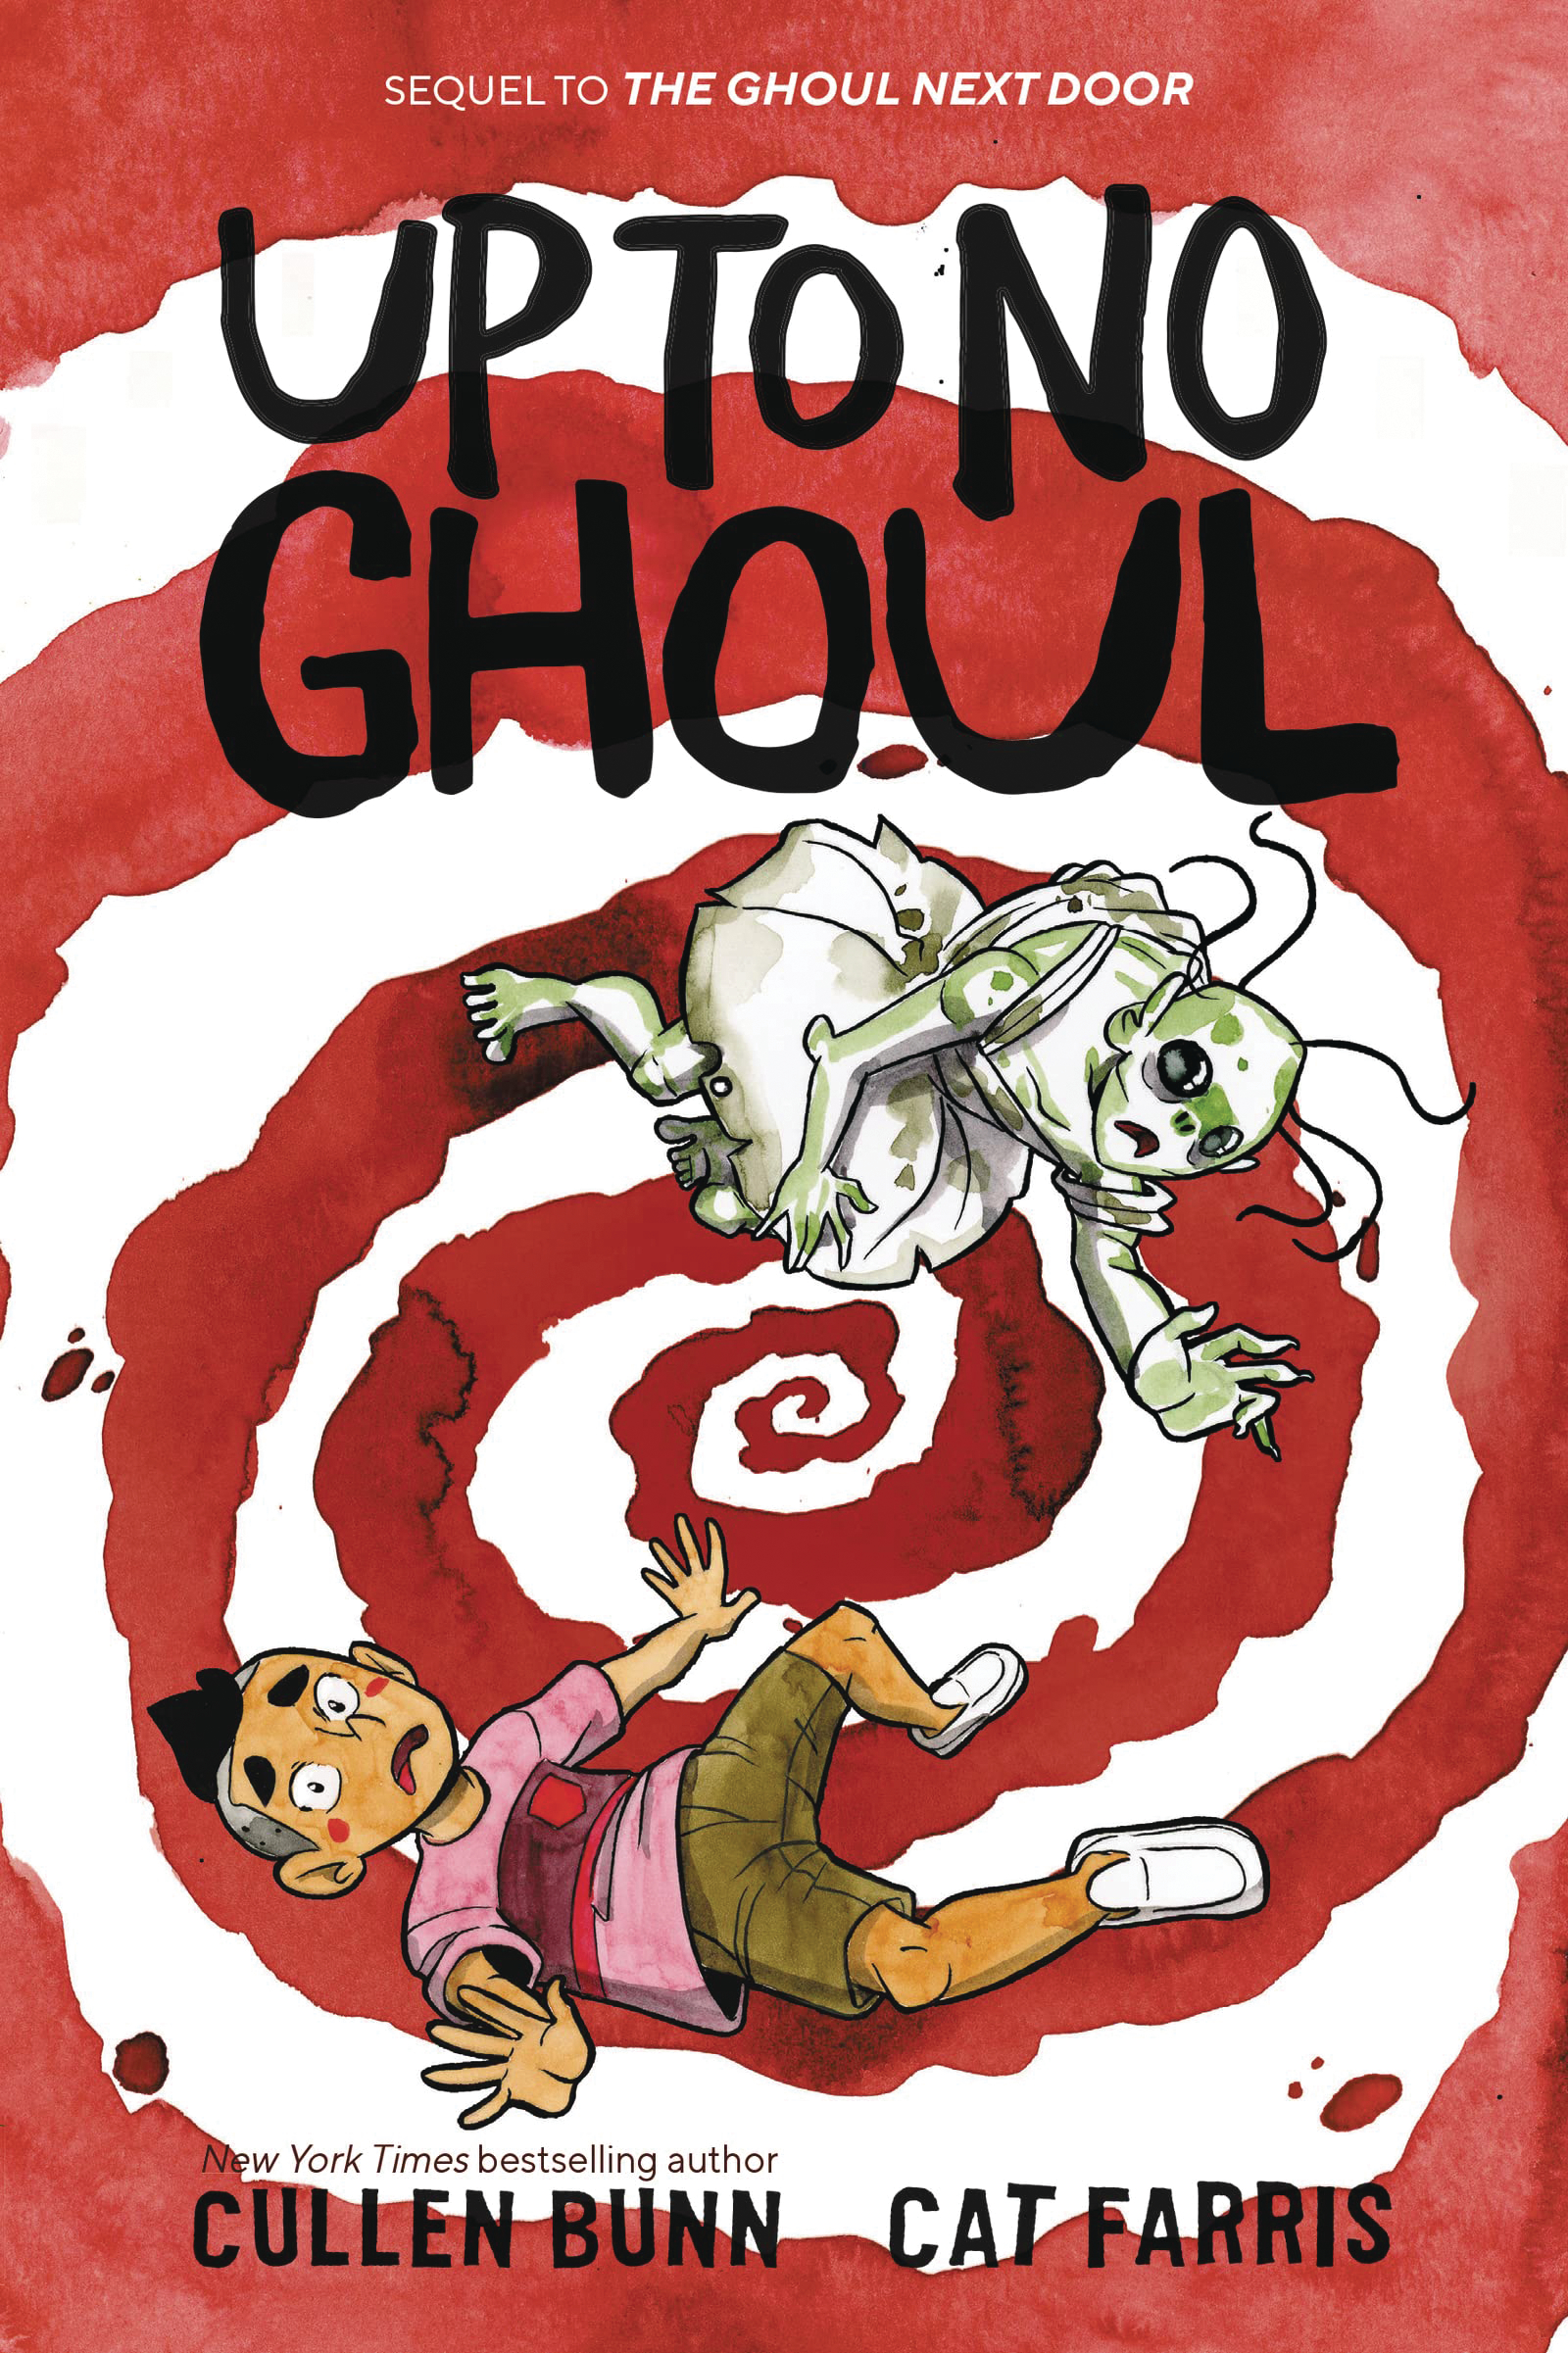 Up To No Ghoul Graphic Novel